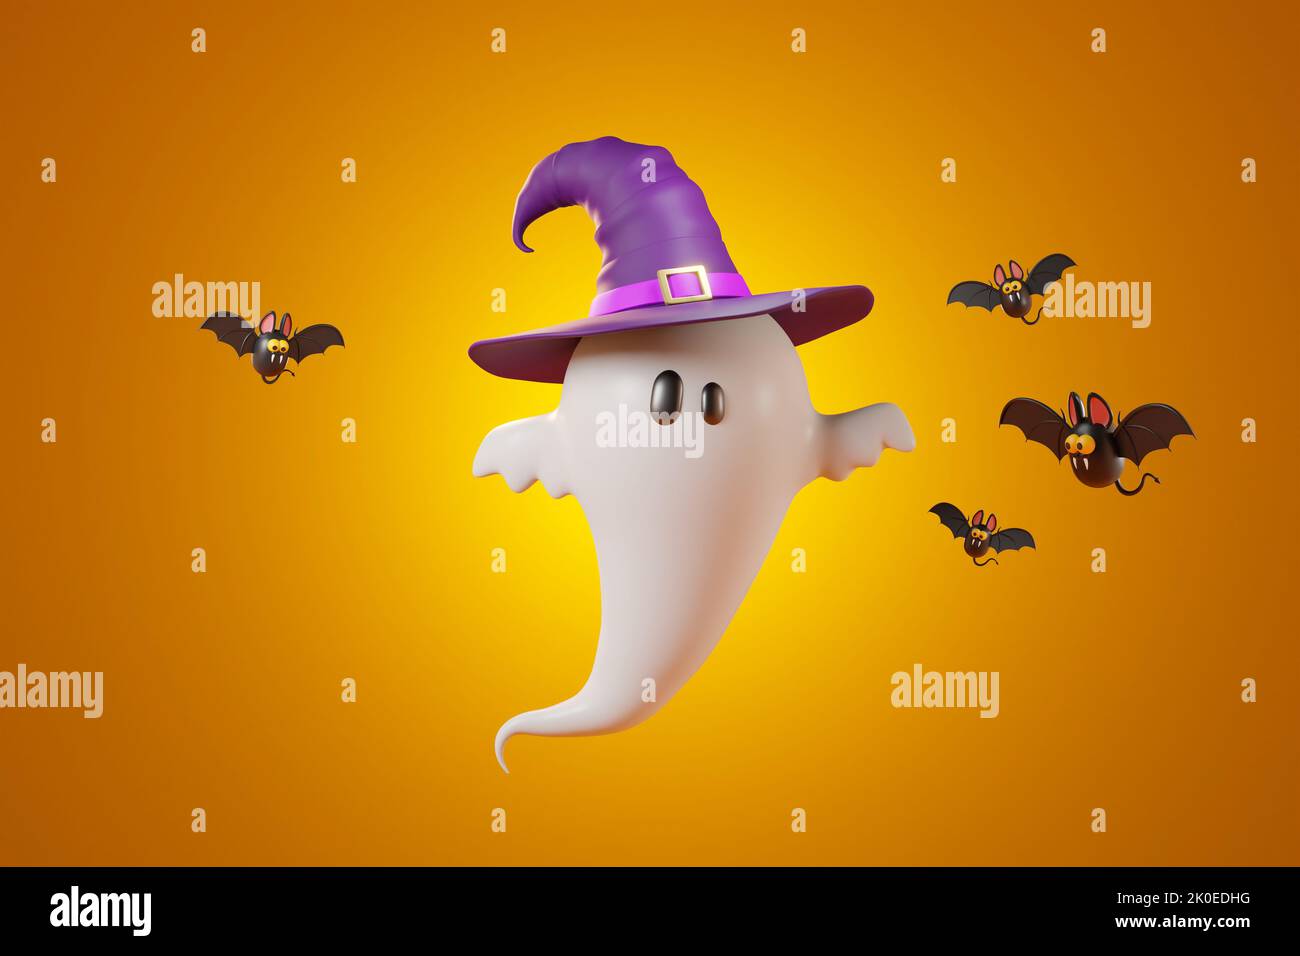 Halloween Ghosts and Bats. 3d illustration Banque D'Images